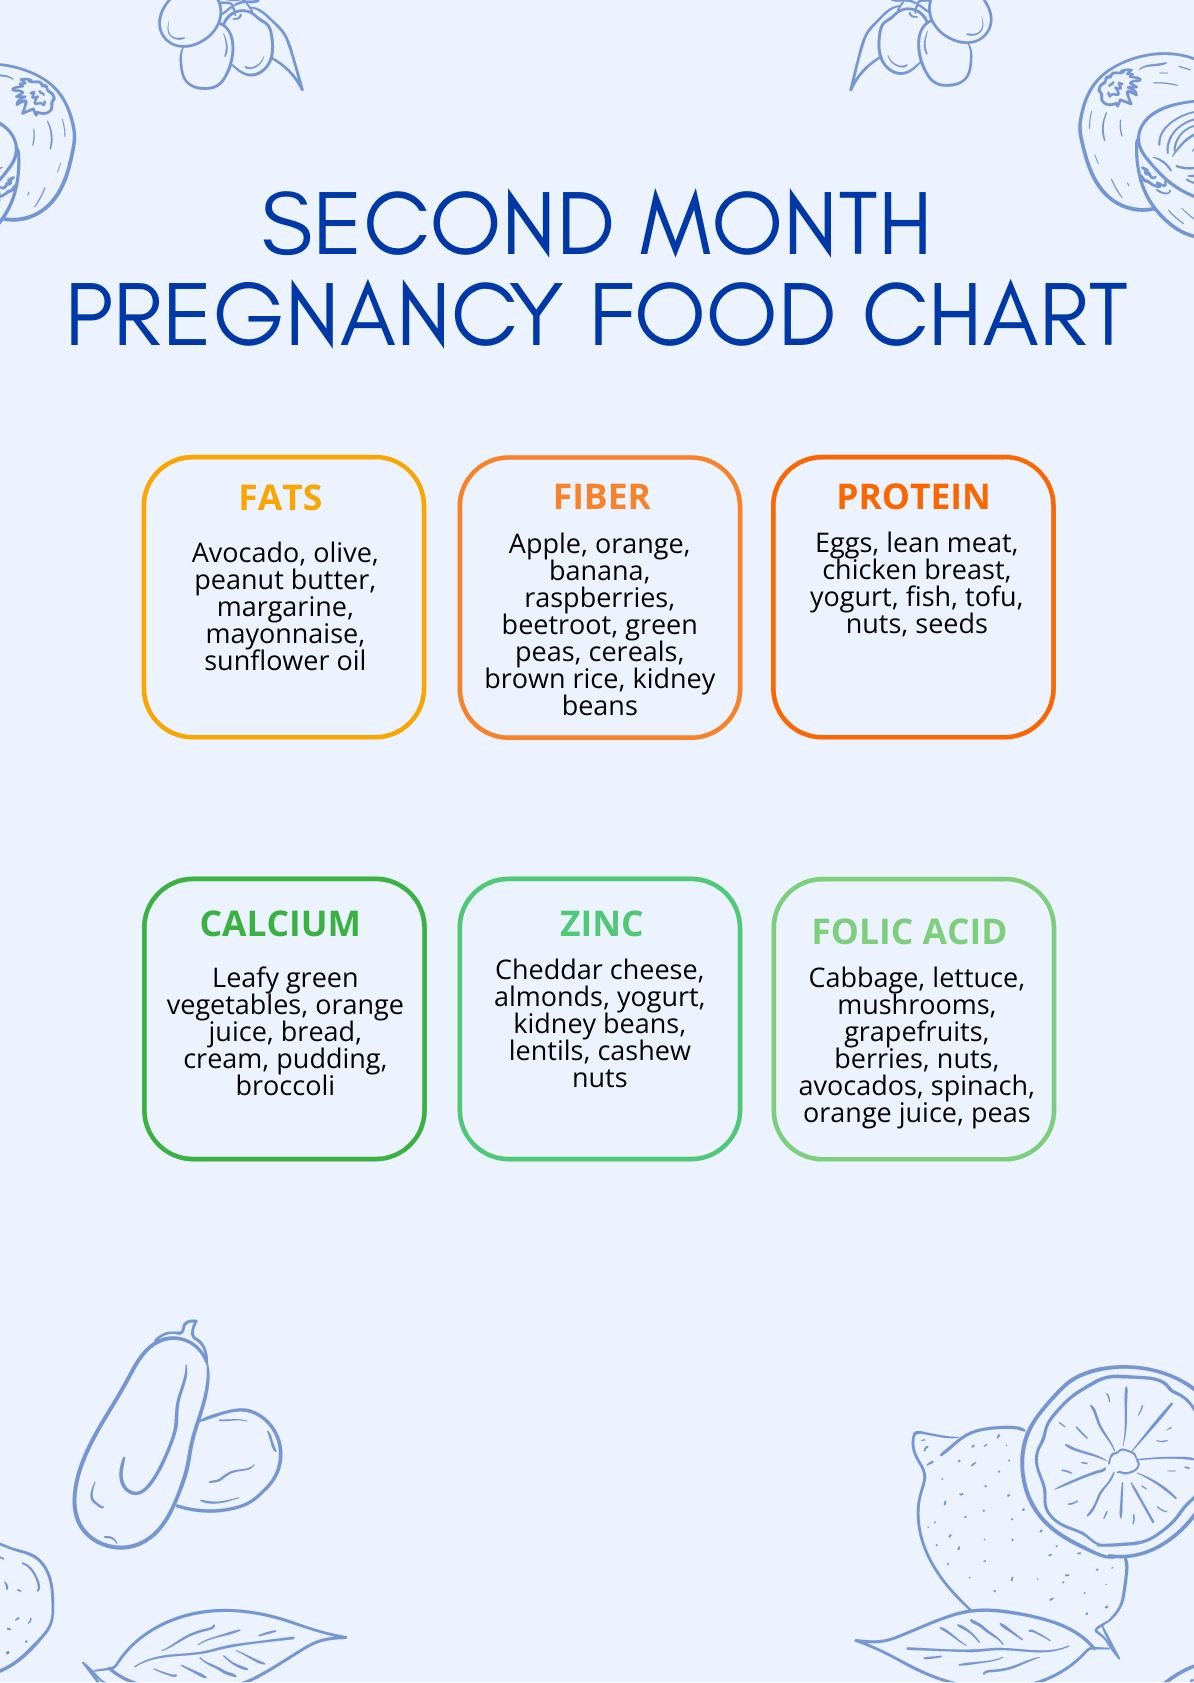 Second Month Pregnancy Food Chart